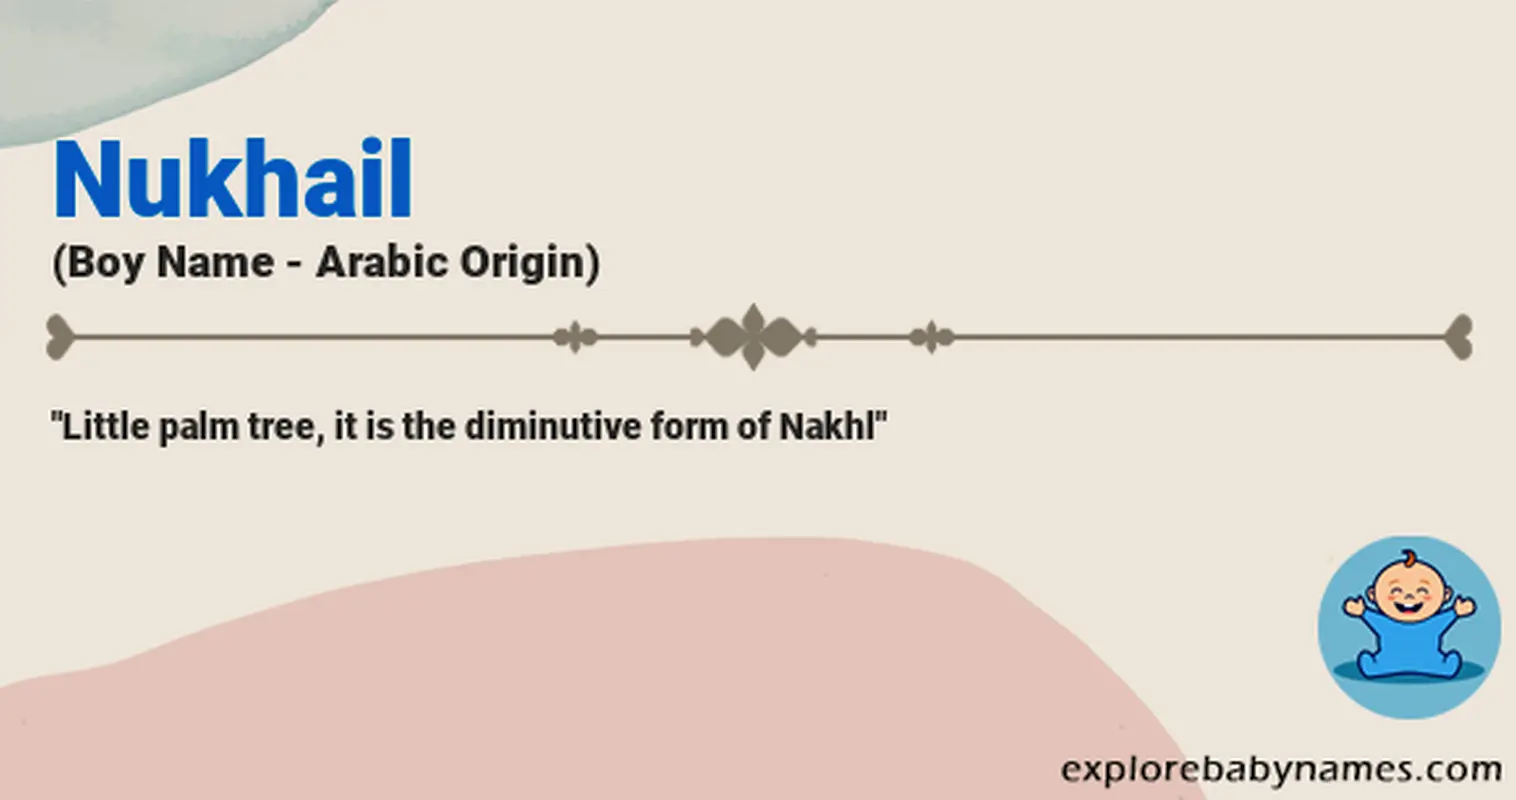 Meaning of Nukhail